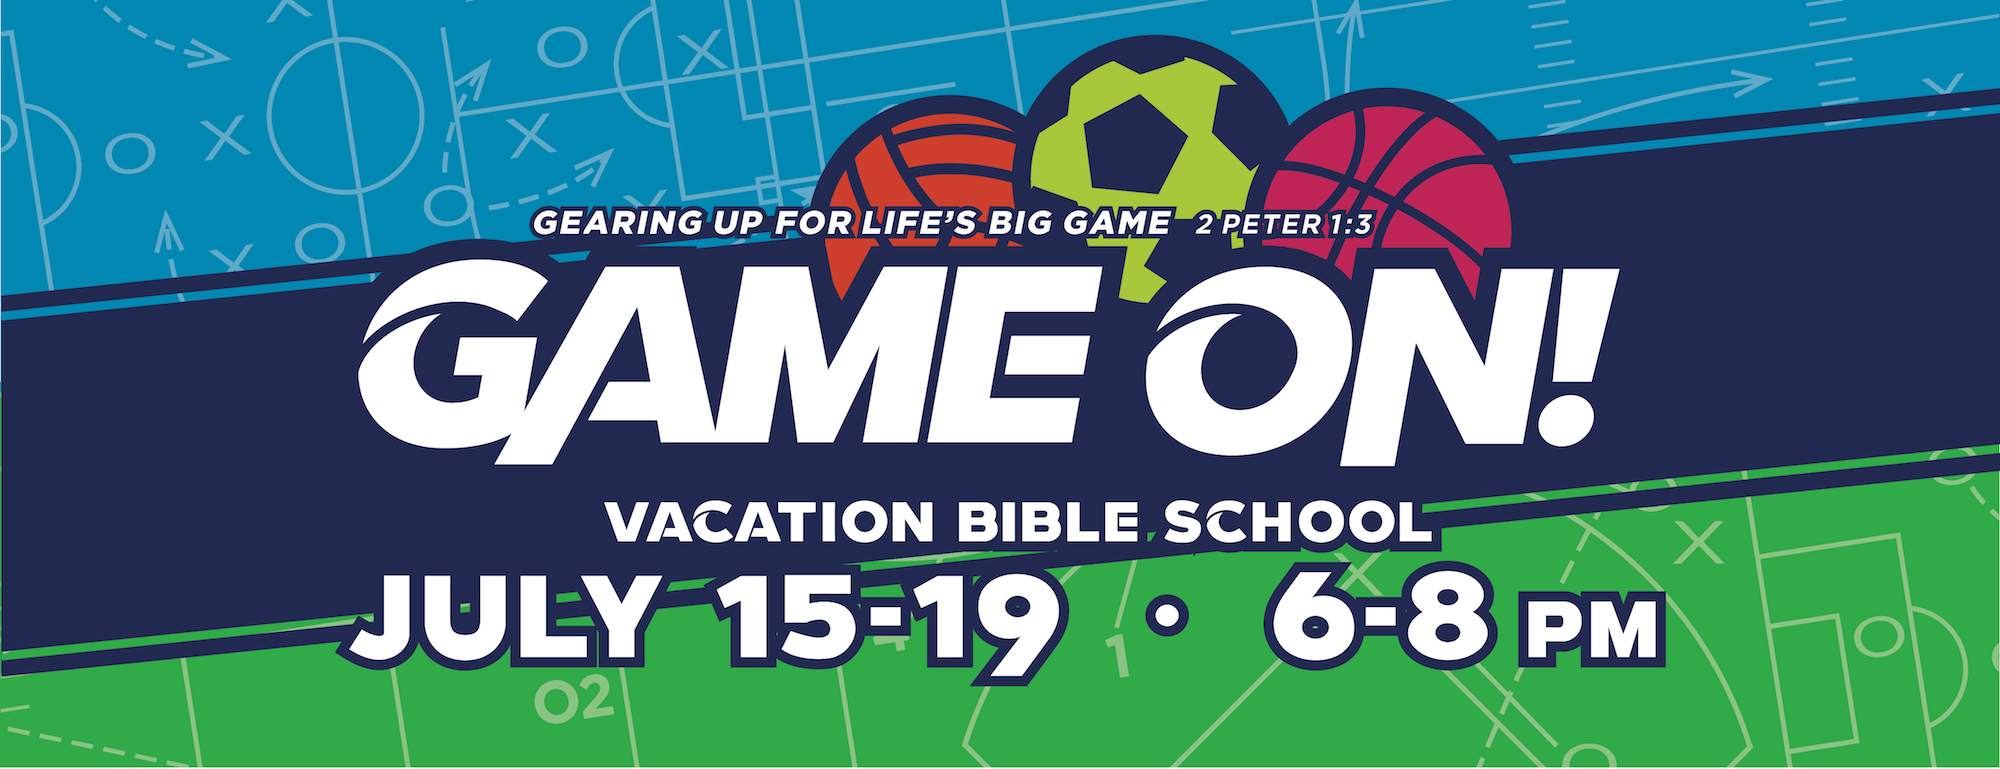 Game on! (VBS)